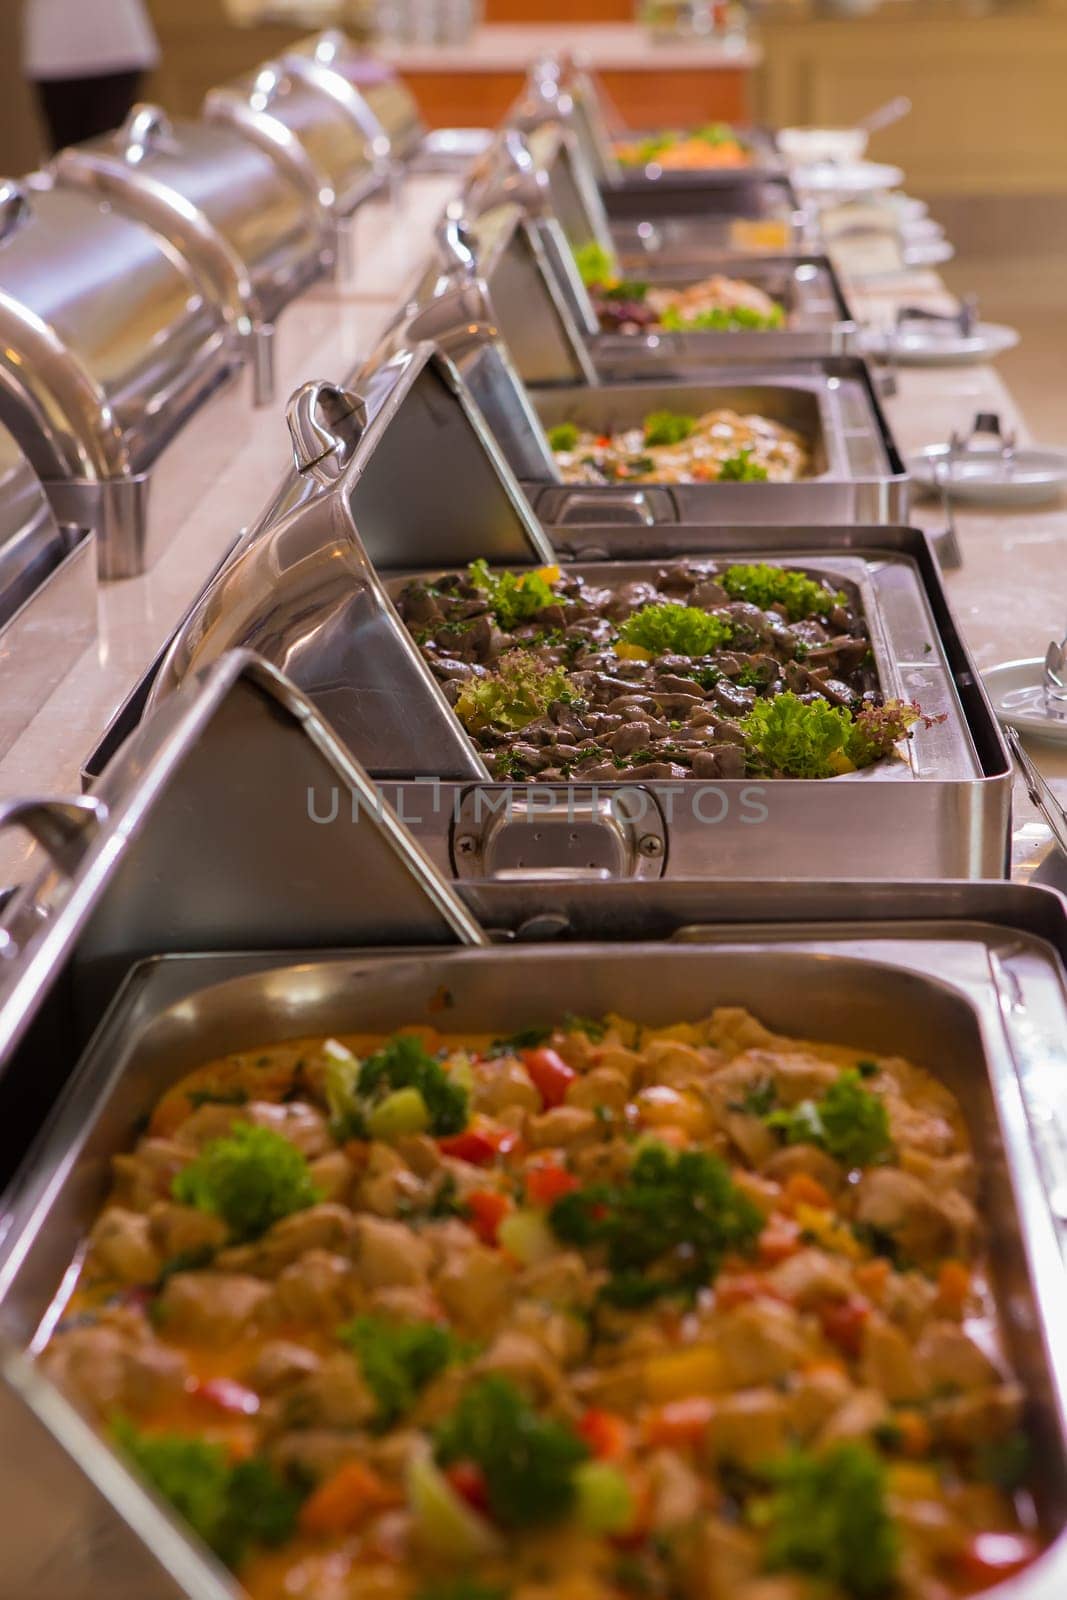 Groups of Buffet in the Restaurant. Macro with shallow dof